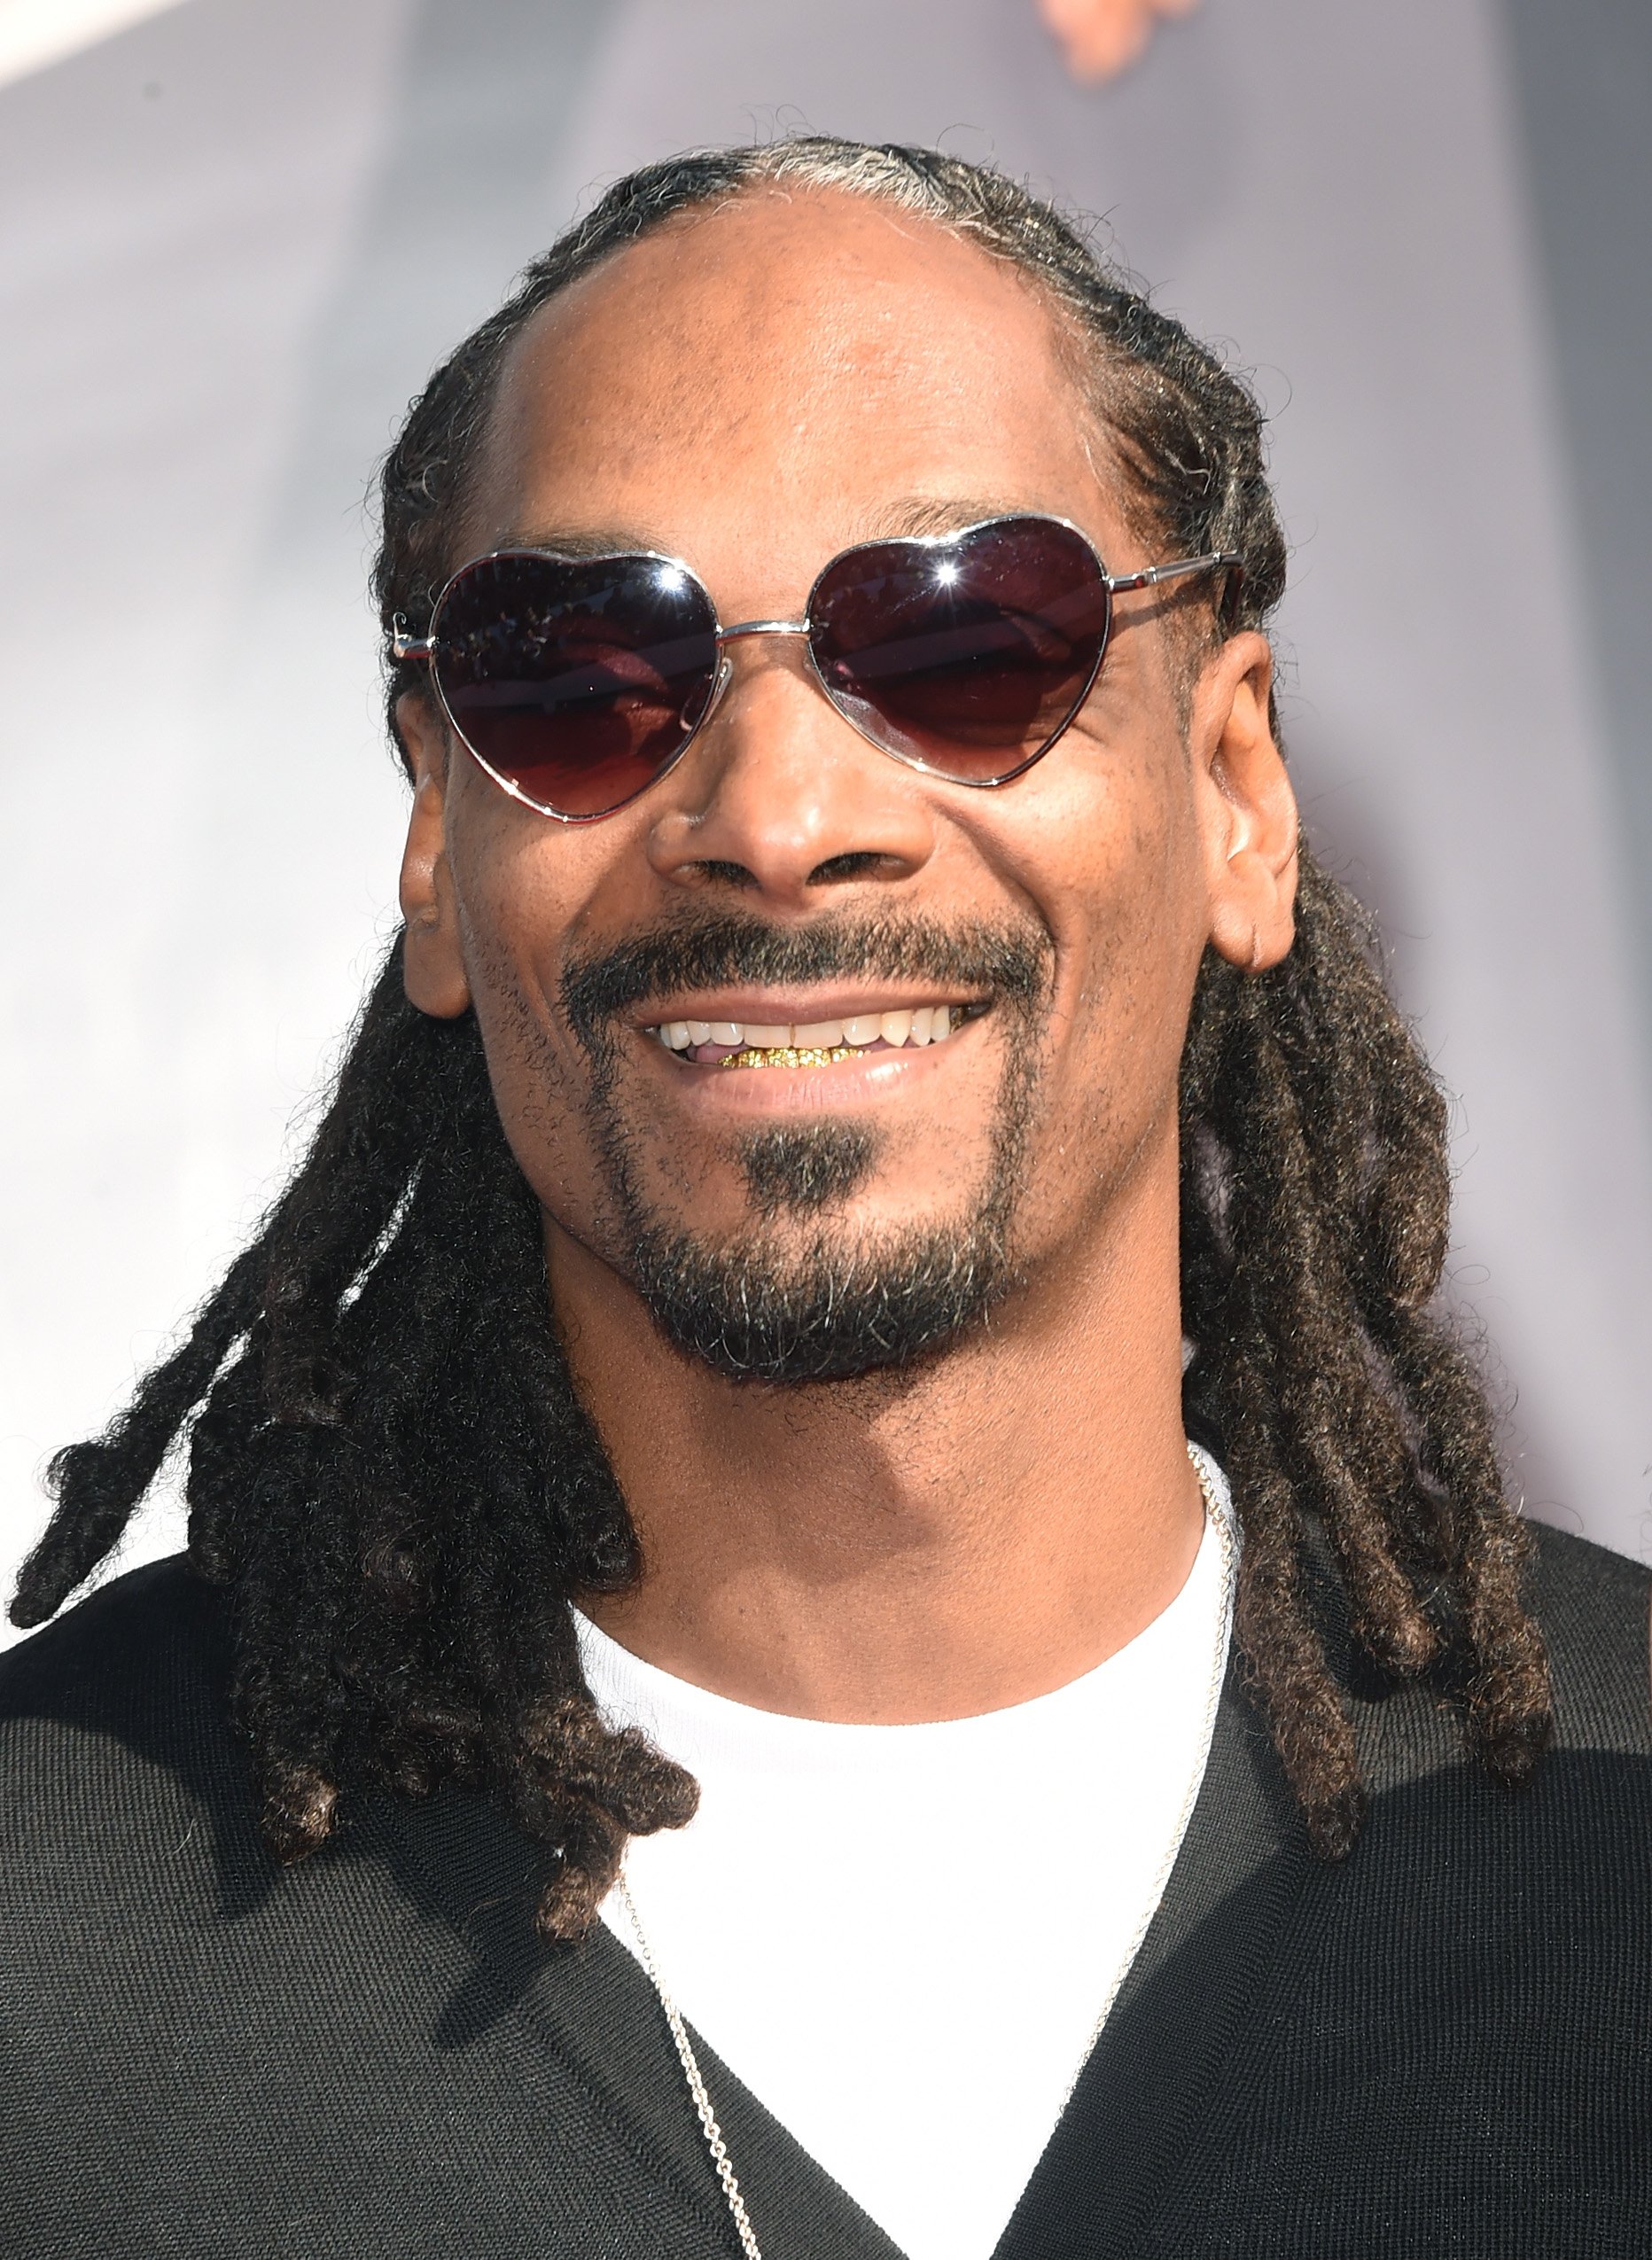 Snoop Dogg attends the 2014 MTV Video Music Awards at The Forum on August 24, 2014. | Photo: Getty Images